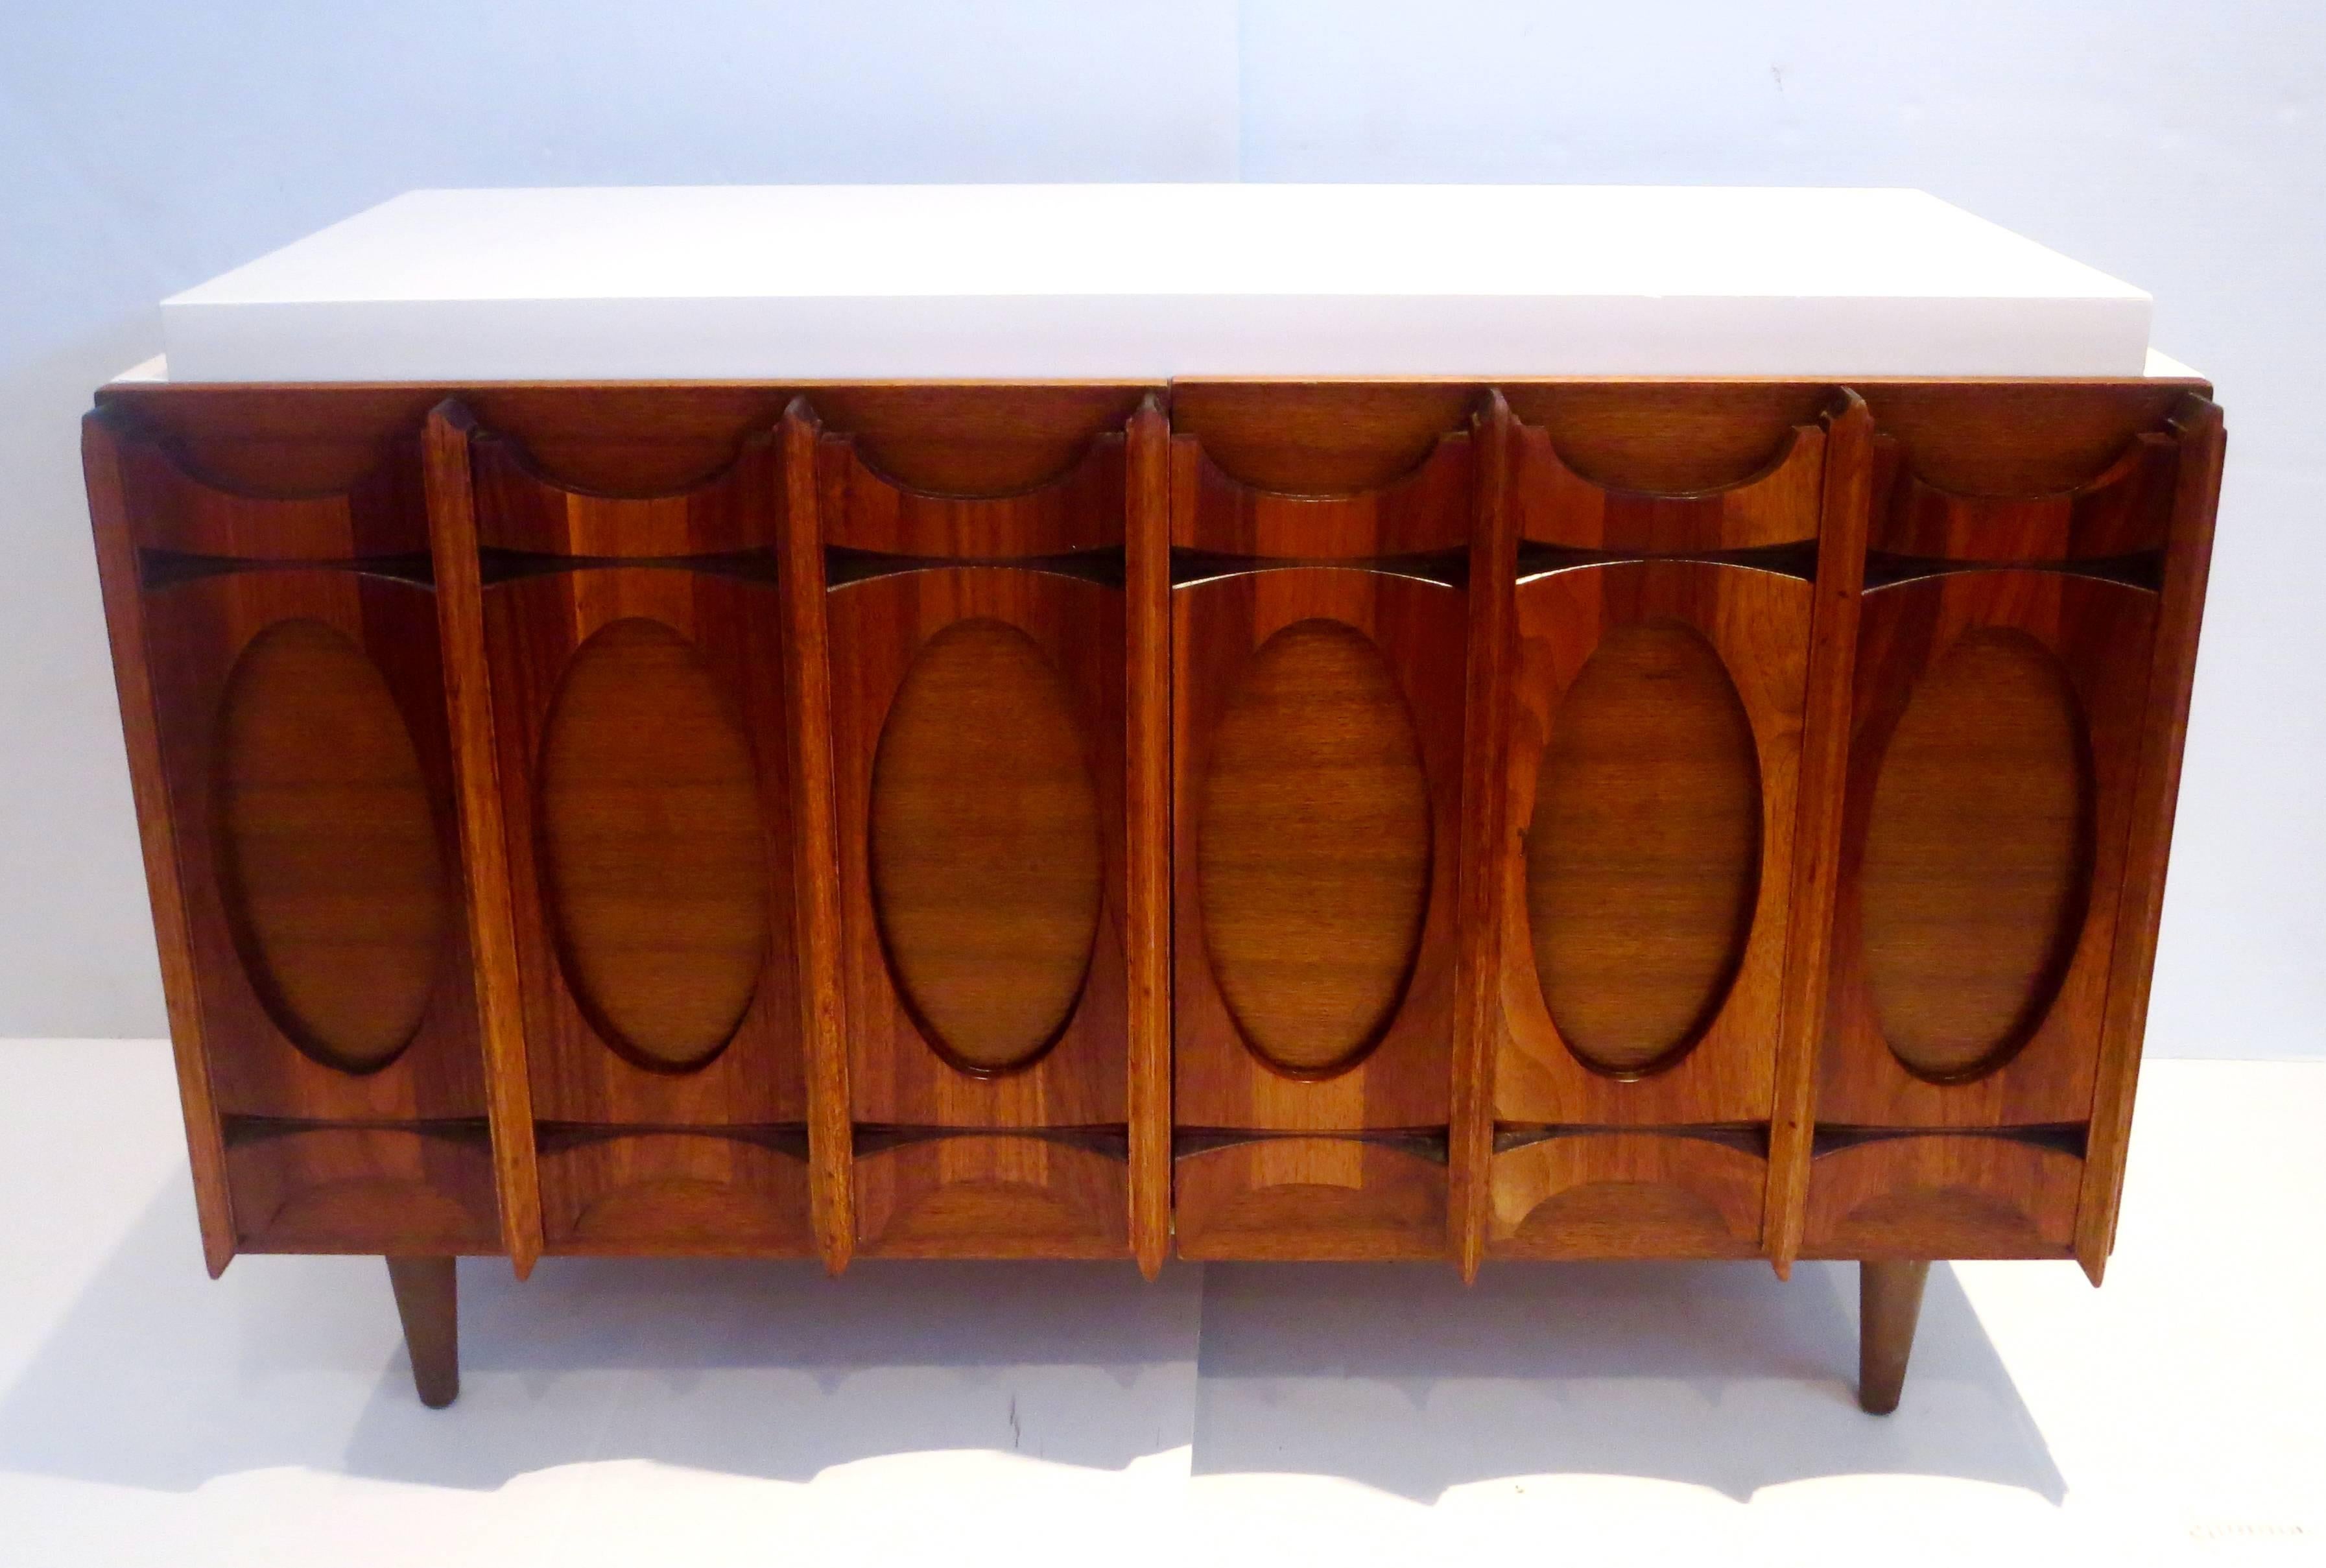 20th Century 1950s American Modern Cabinet with Sculpted Walnut Facade and White Lacquer